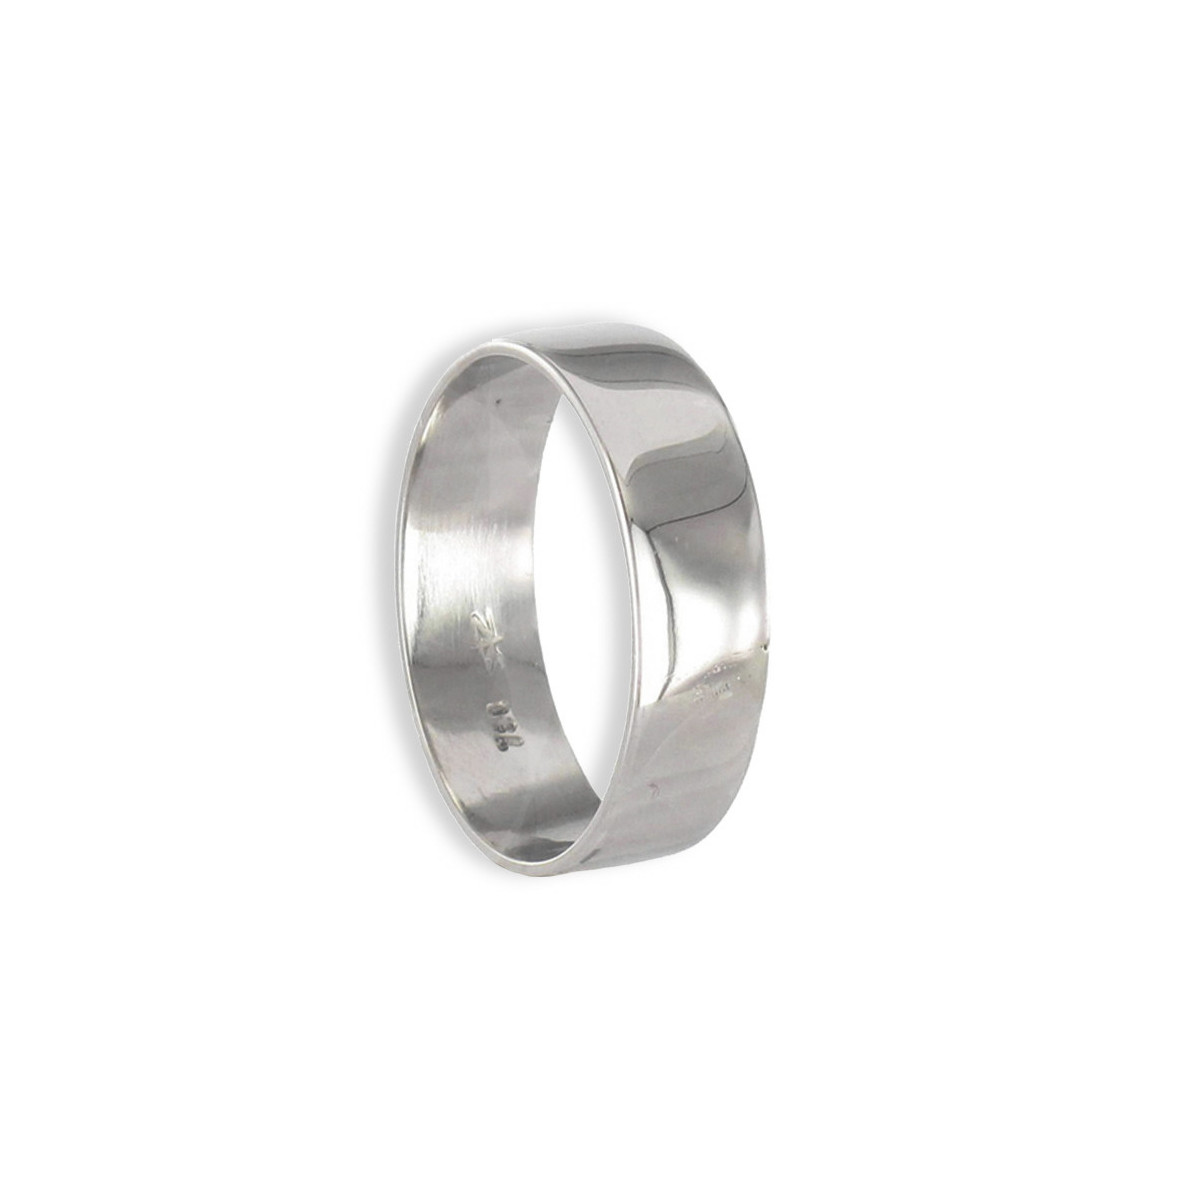 GOLD RING 6 MM WIDE